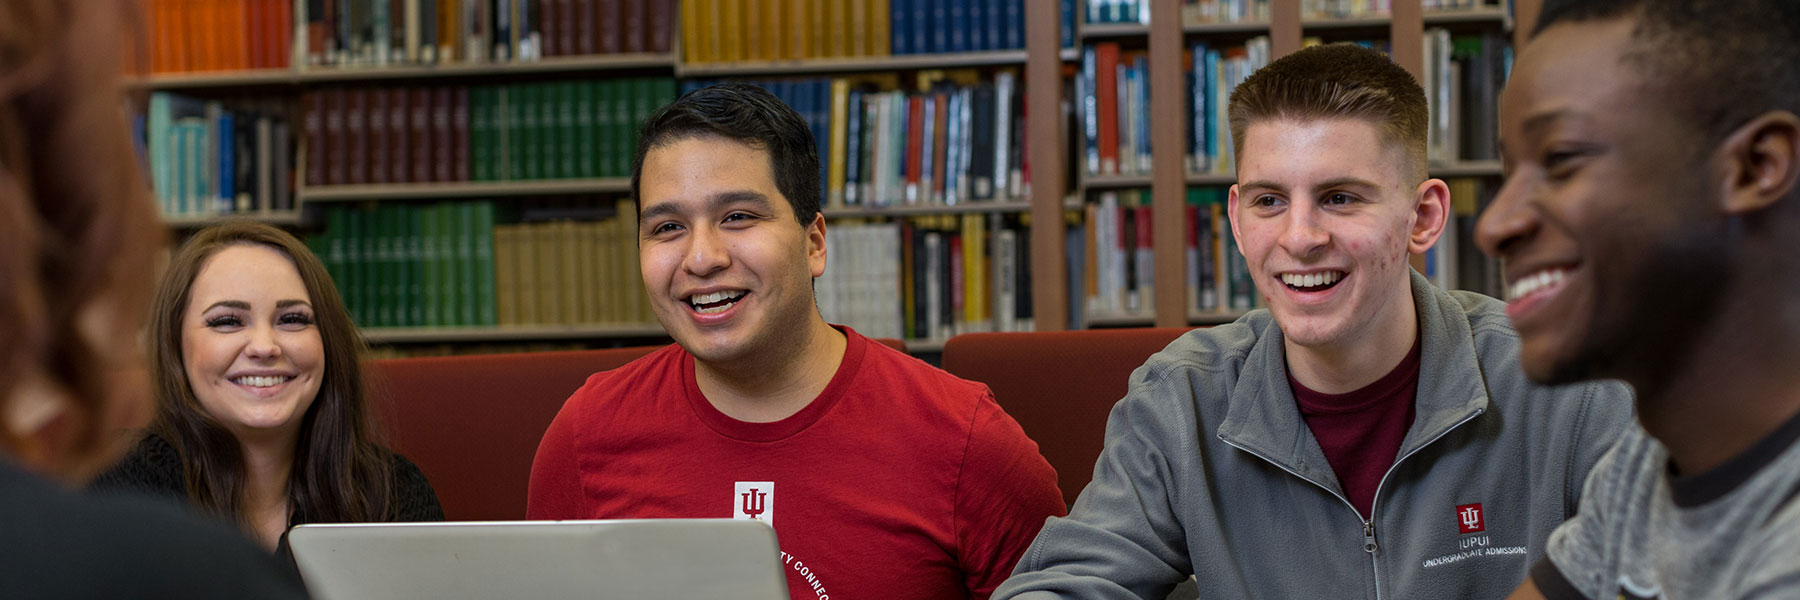 Four IUPUI students work together in the library and laugh